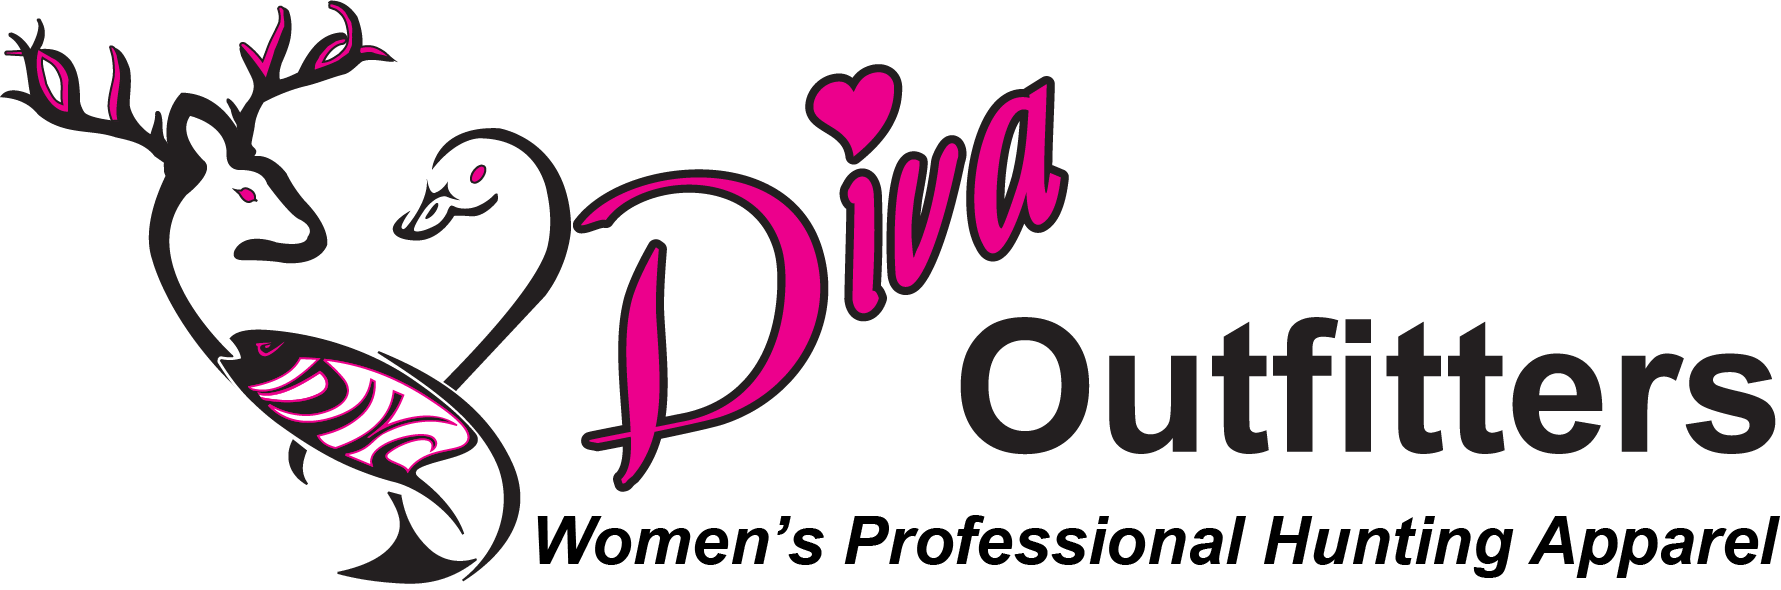 DivaOutfitters.com